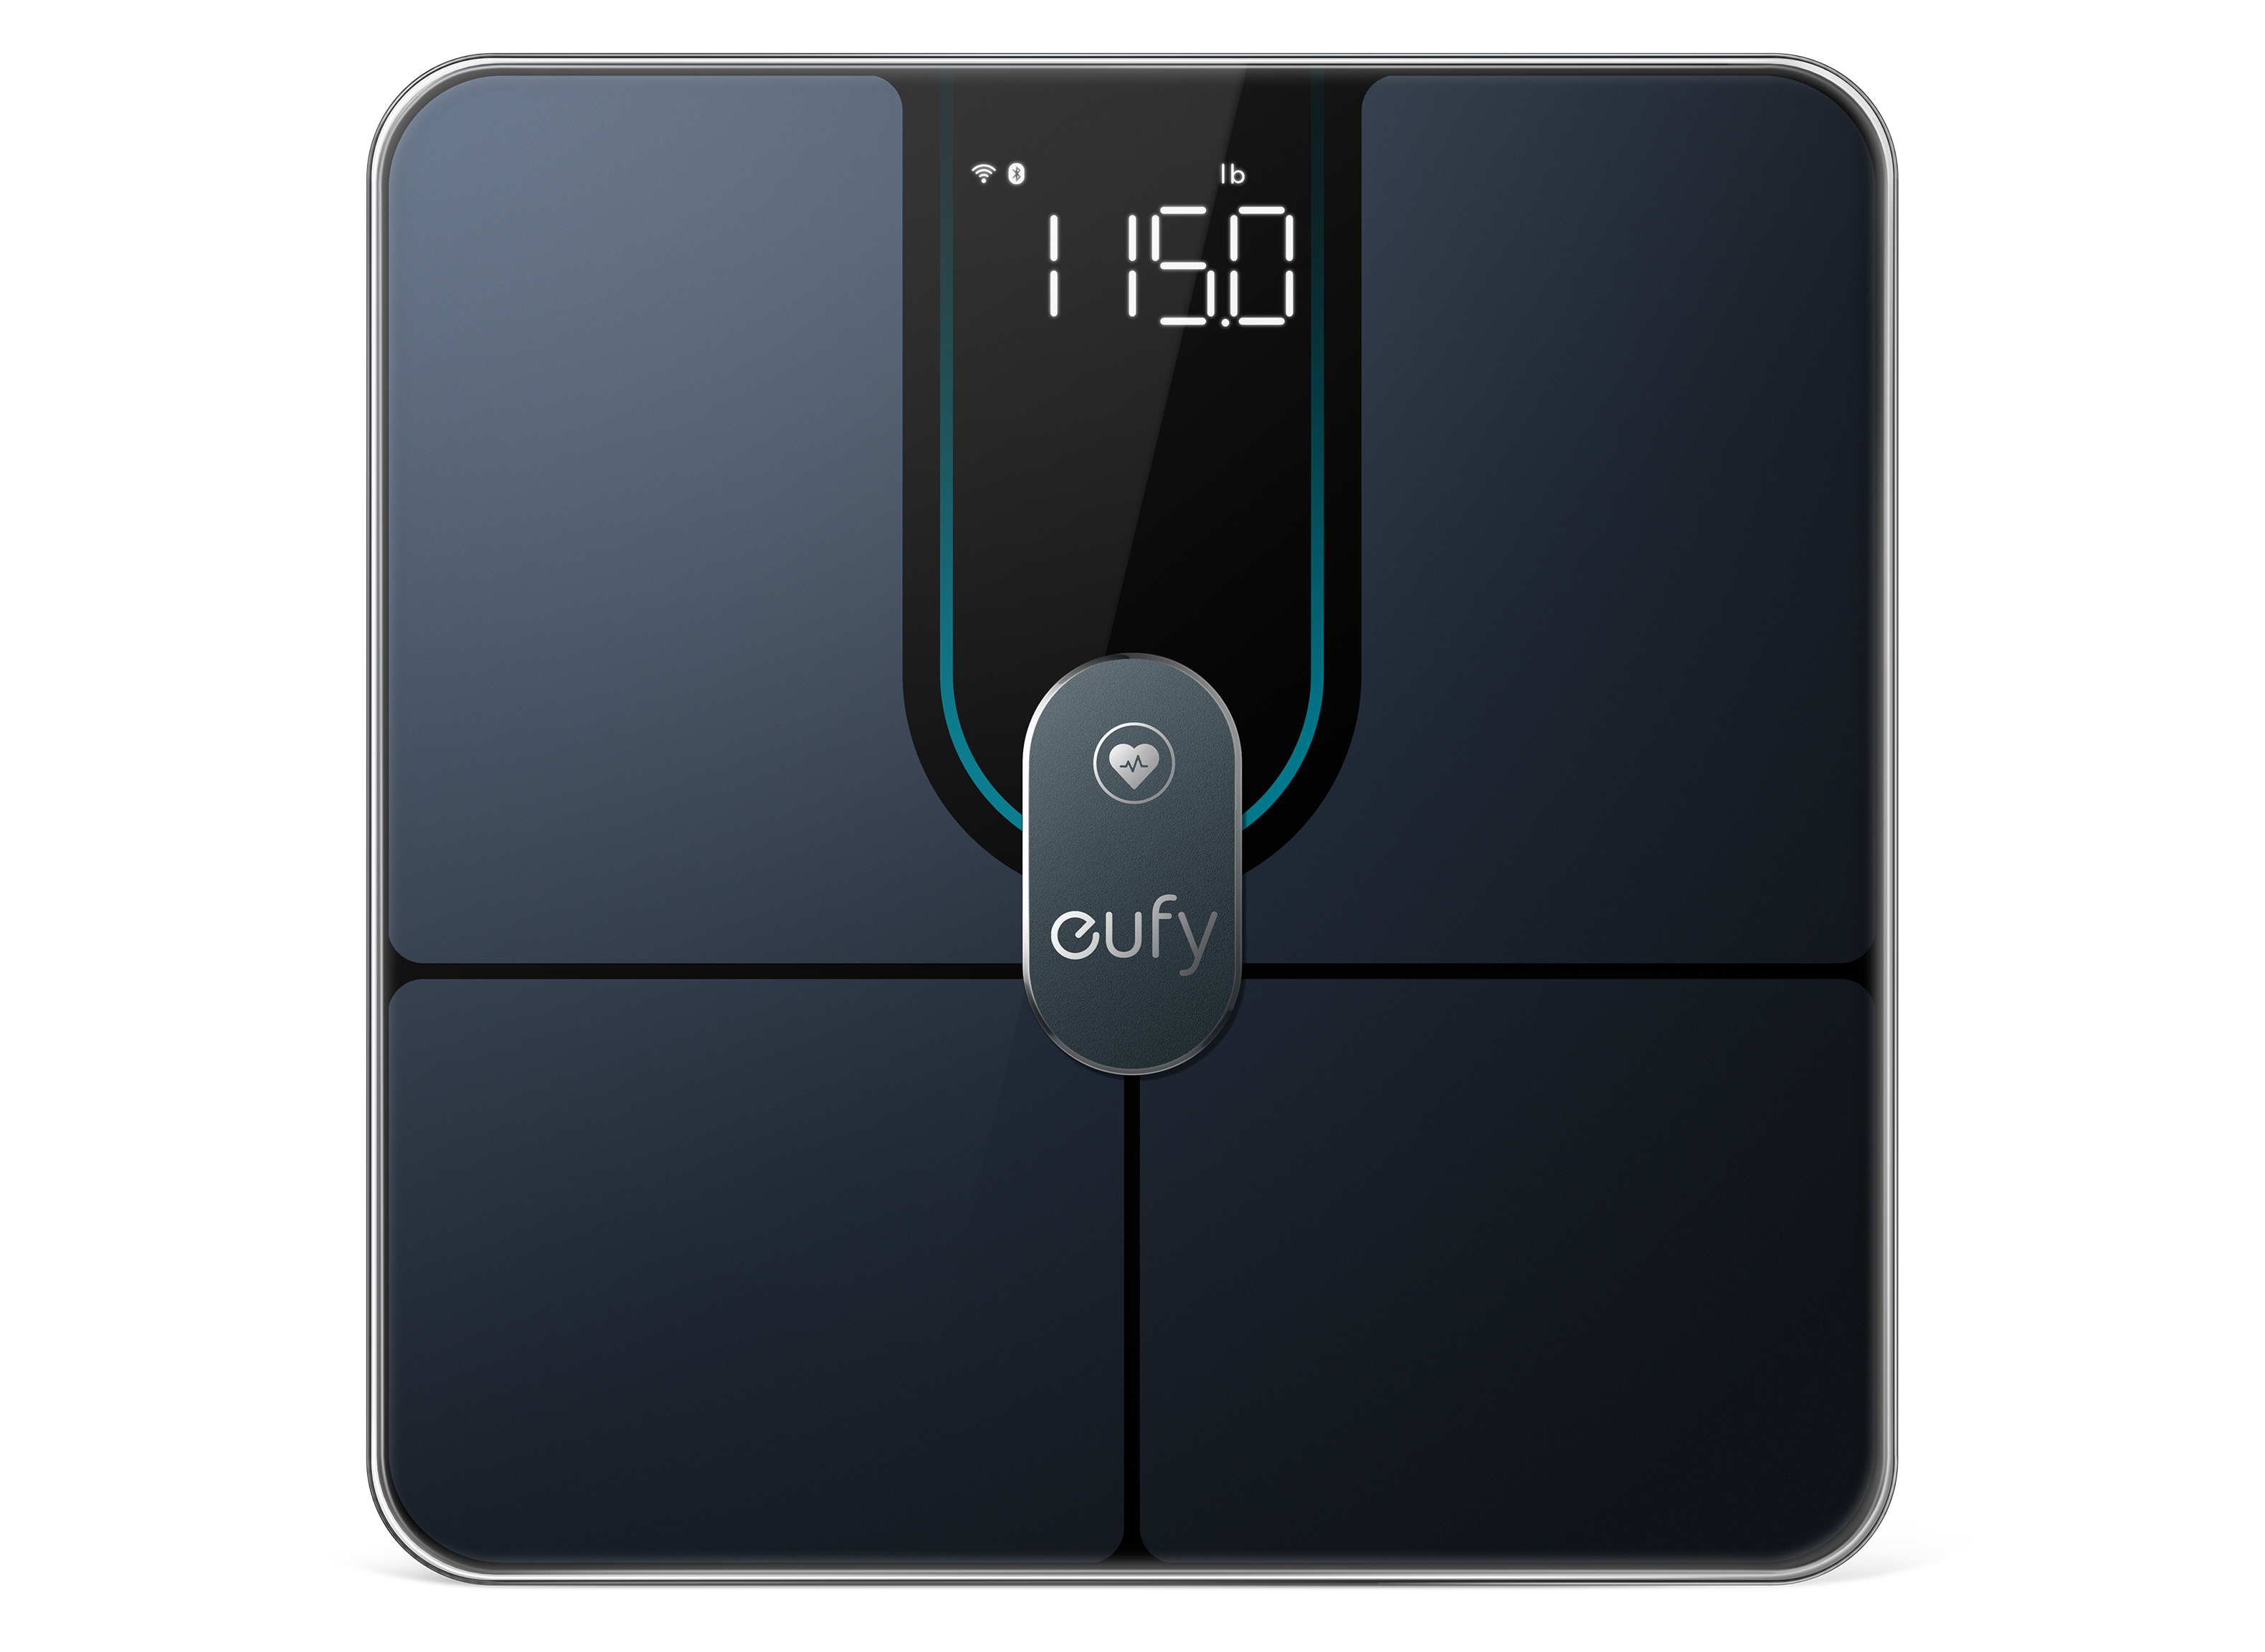 https://crdms.images.consumerreports.org/prod/products/cr/models/407113-digital-scales-eufy-smart-scale-p2-pro-10030880.png